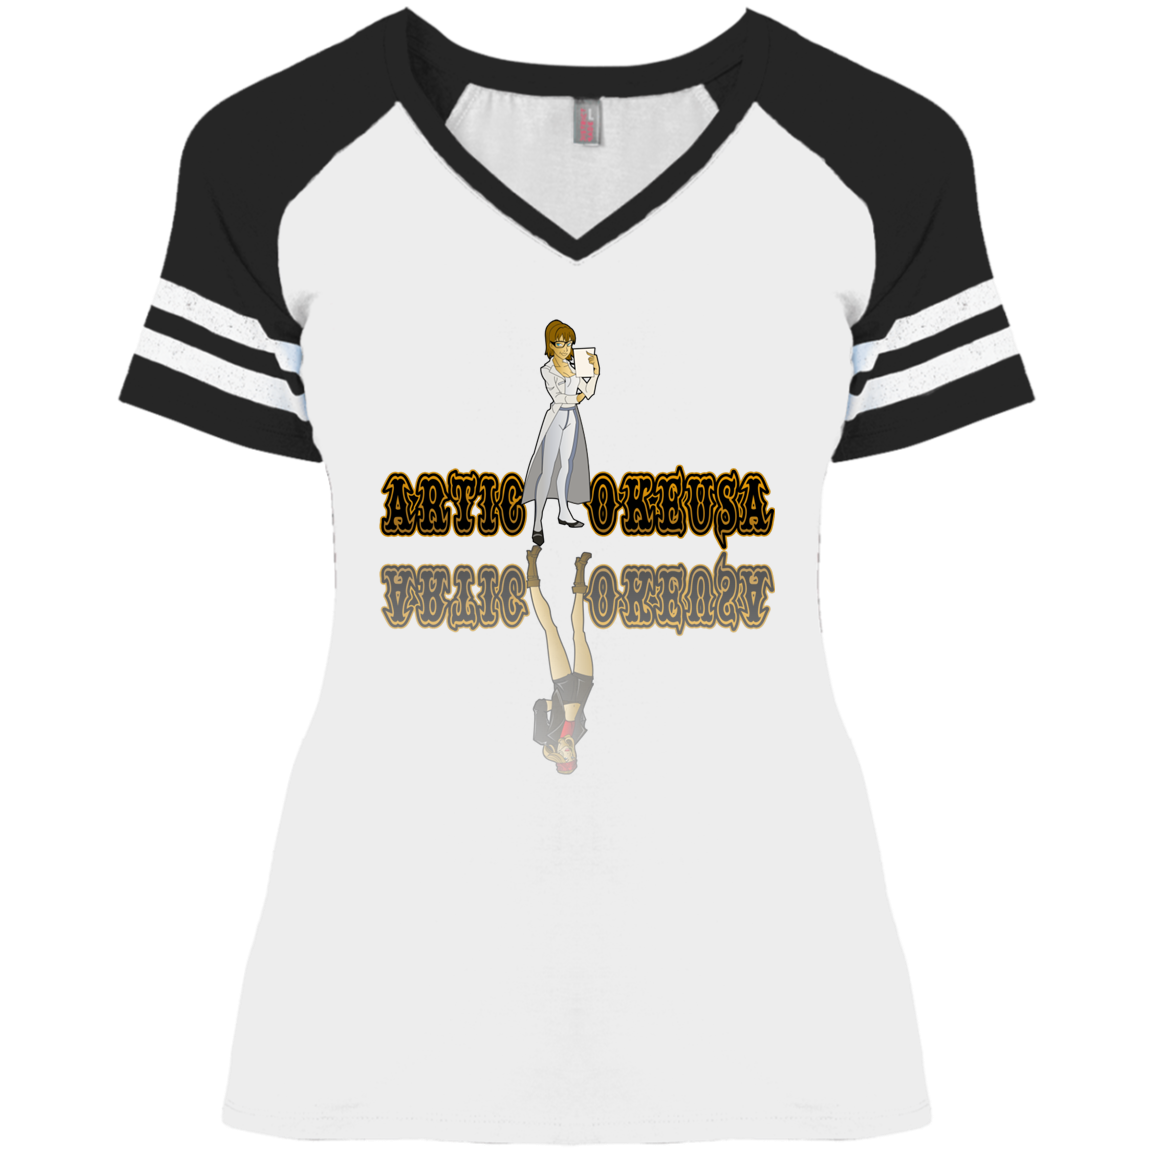 ArtichokeUSA Custom Design. Façade: (Noun) A false appearance that makes someone or something seem more pleasant or better than they really are.  Ladies' Game V-Neck T-Shirt